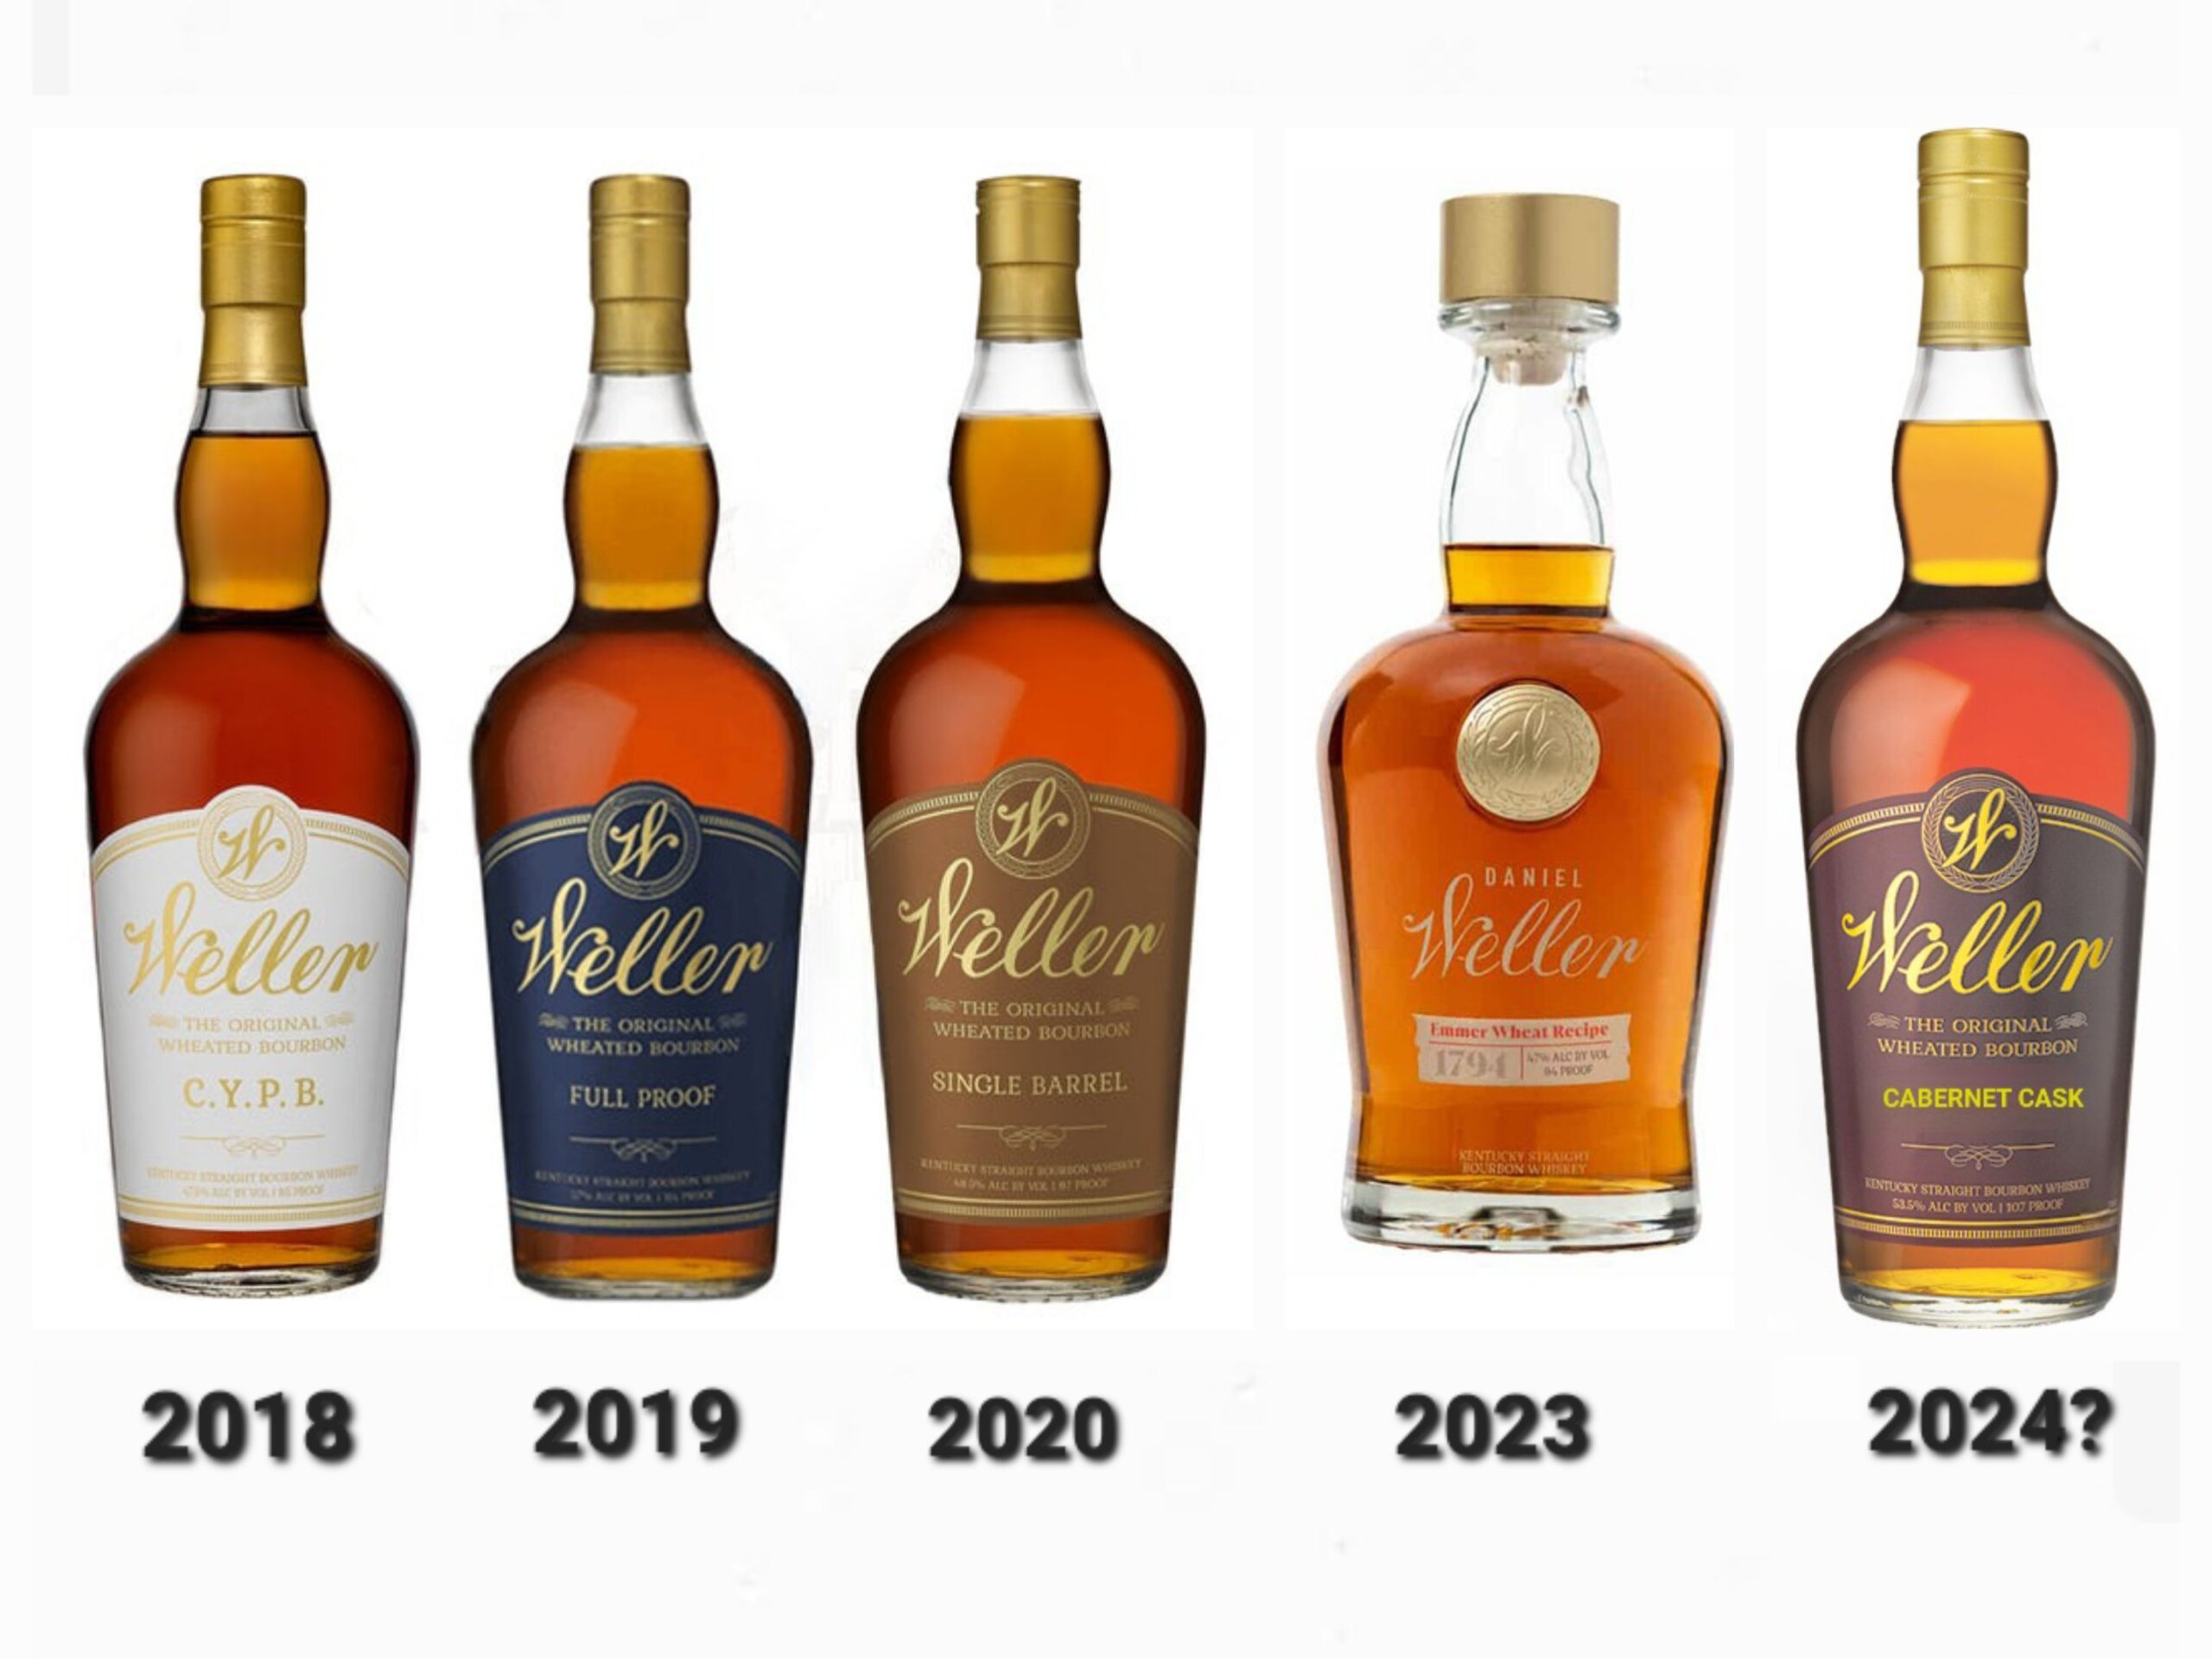 Two new developments for Weller have me wondering about cask finishes and reduced age statements